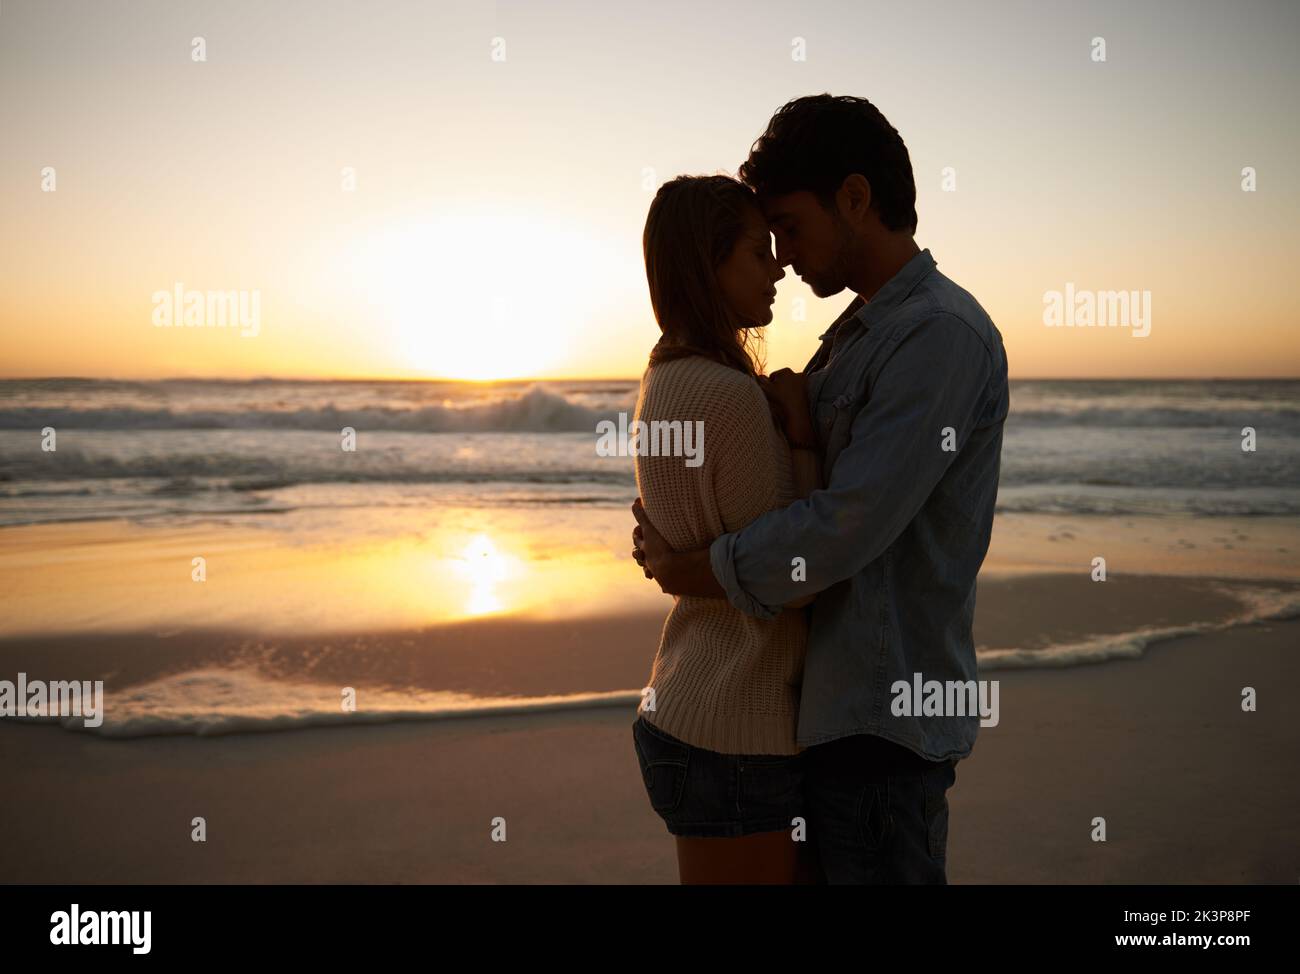 Relishing this moment. A blissful young couple celebrating their love at sunset on the be. Stock Photo